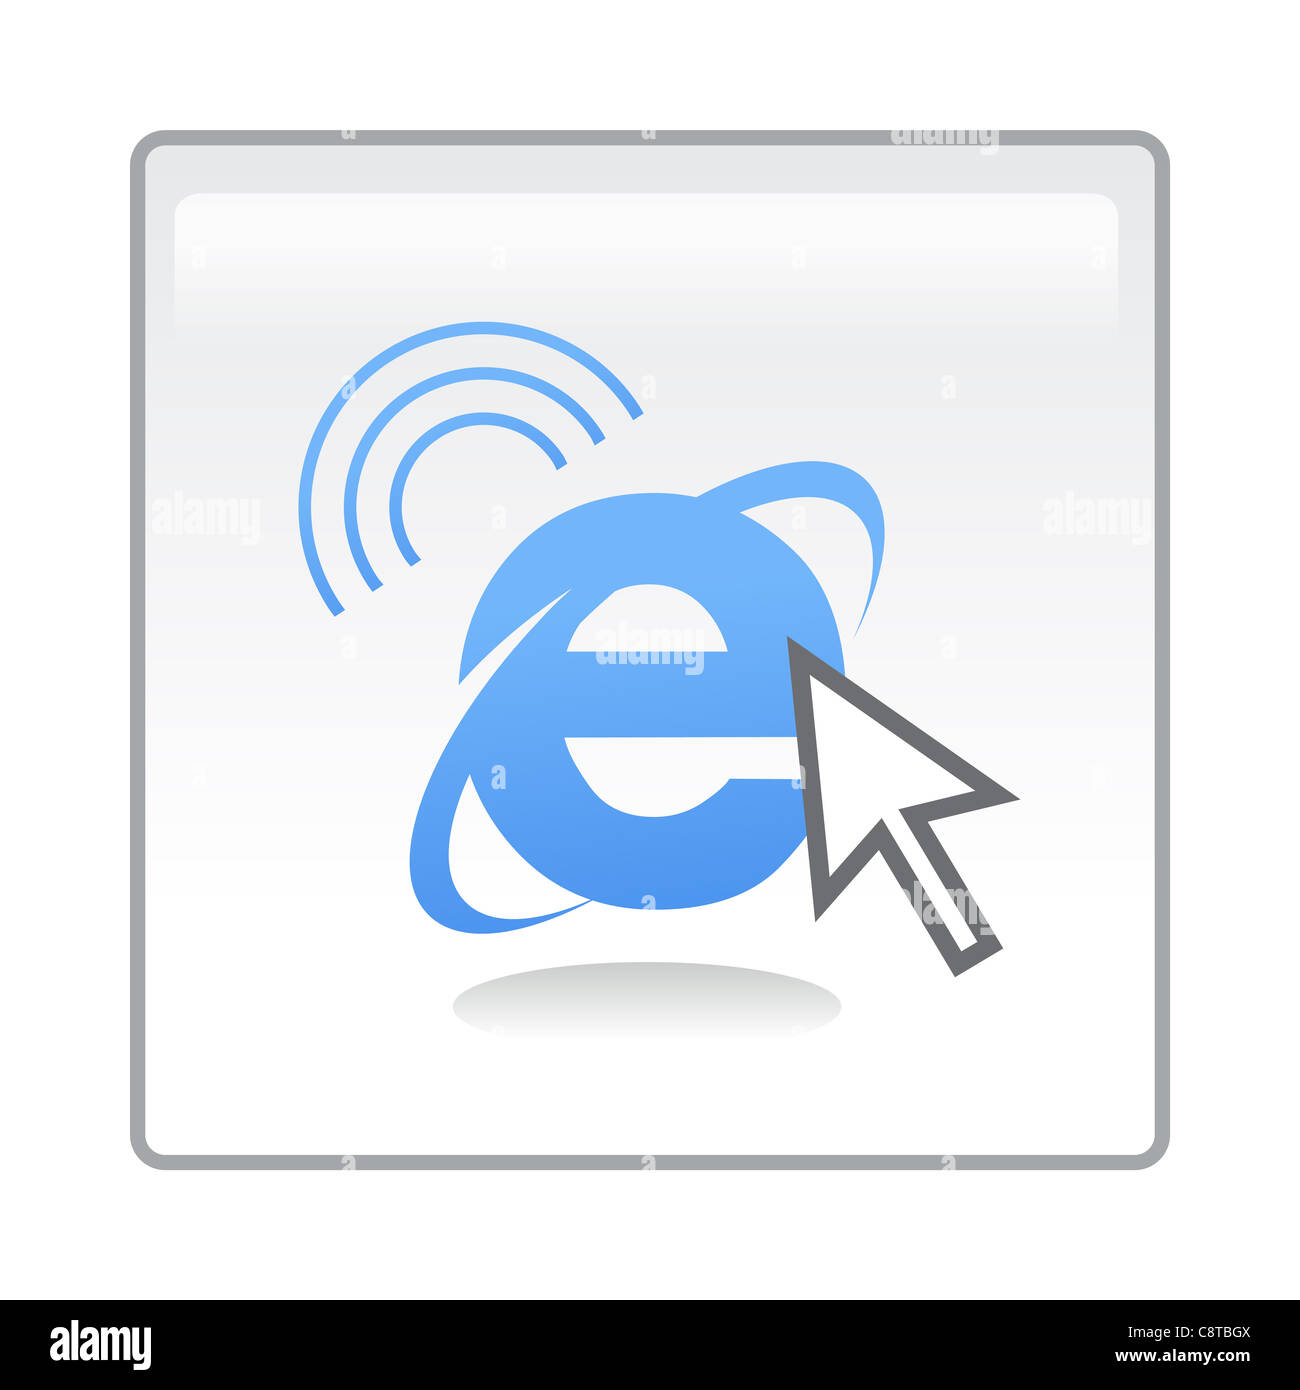 Illustration of internet symbol with a cursor Stock Photo